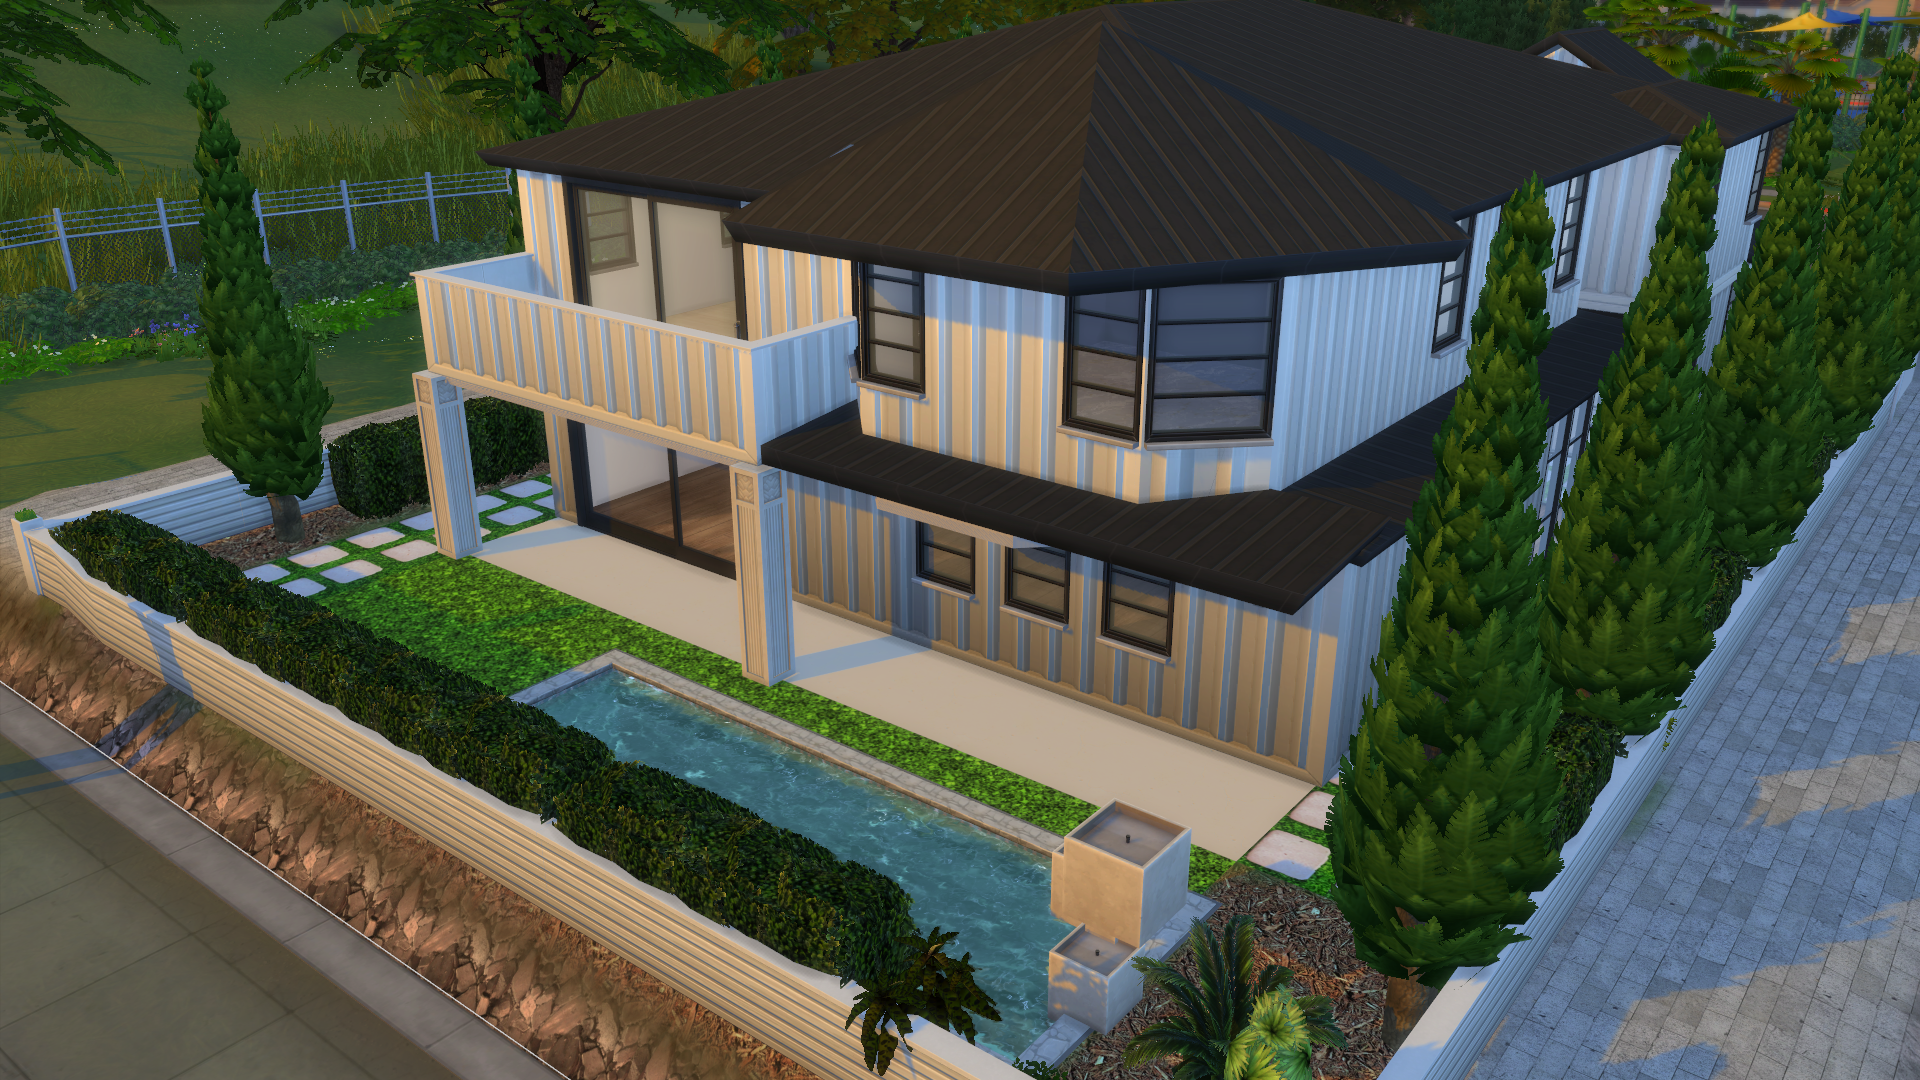 The Coastal Collection - Part Four - The Sims 4 Build / Buy - CurseForge